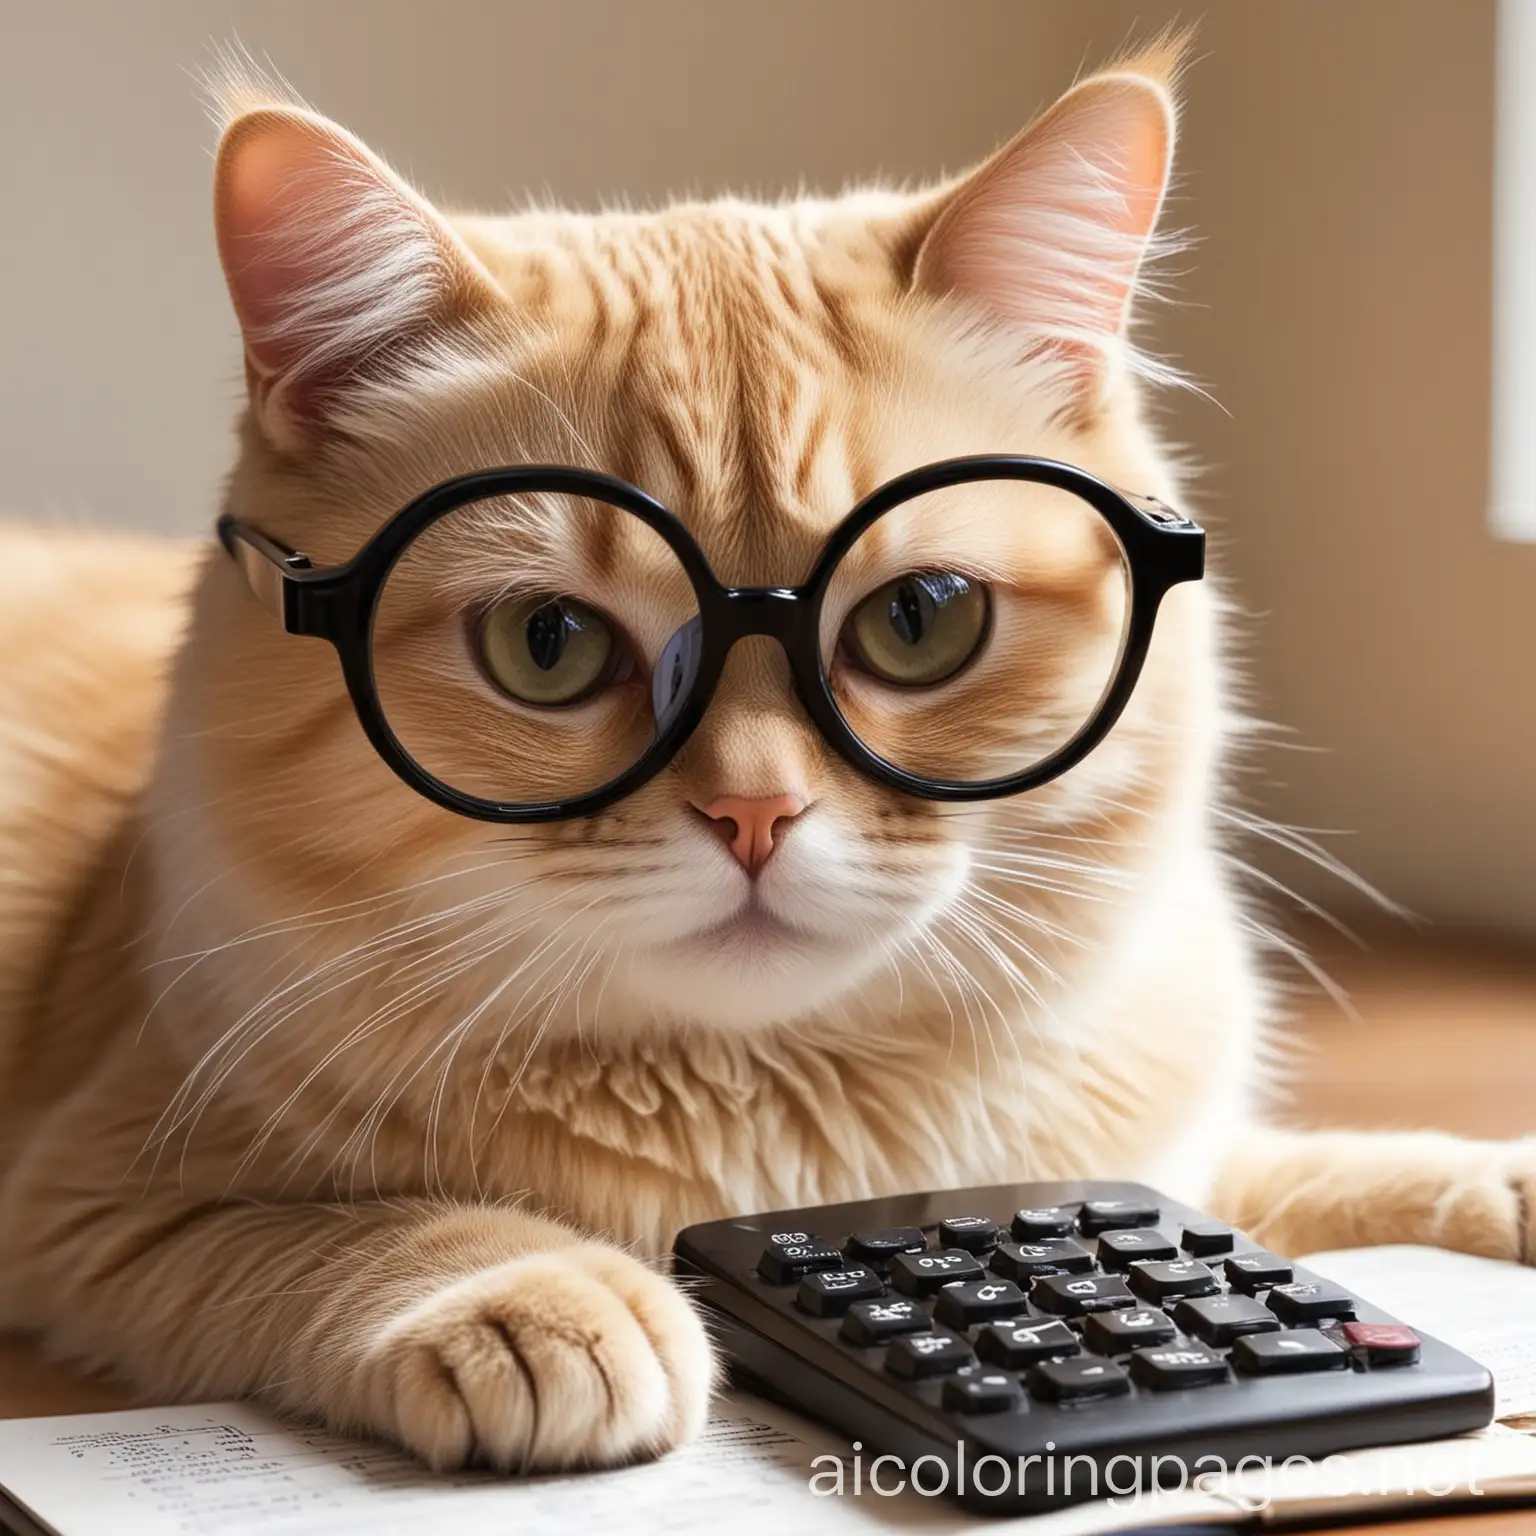 Cat-with-Glasses-Using-Calculator-for-Mathematical-Calculation